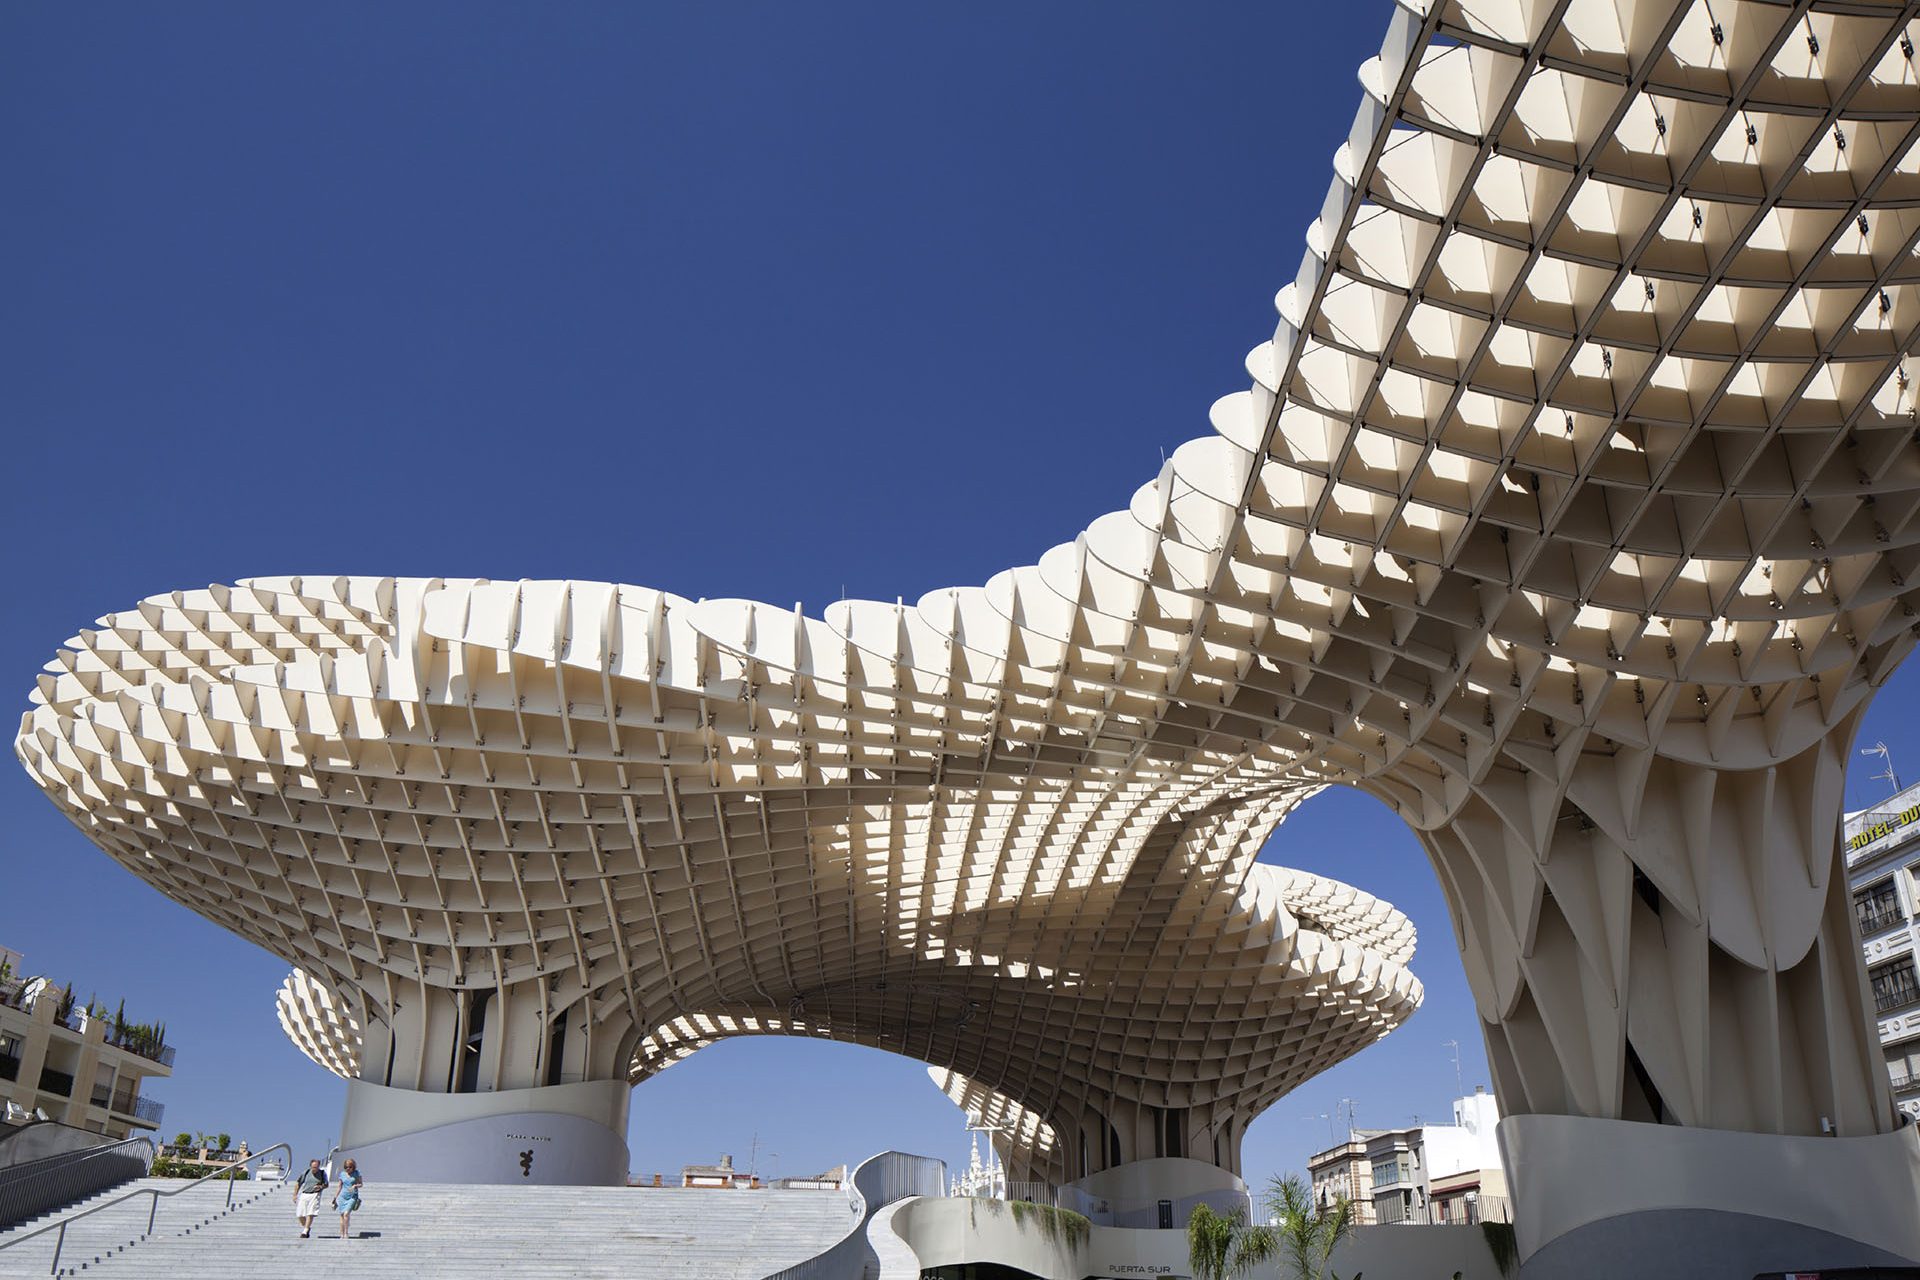 <p>This huge pergola-shaped structure is made of laminated wood and concrete located in Seville (Spain). It is 150 meters/492 feet long, 70 meters/229 feet wide and a height of about 26 meters or 85 feet. This structure houses a traditional market, a square for shows and the Antiquarium Archaeological Museum, in addition to offering a great viewpoint of the city at the top.</p>